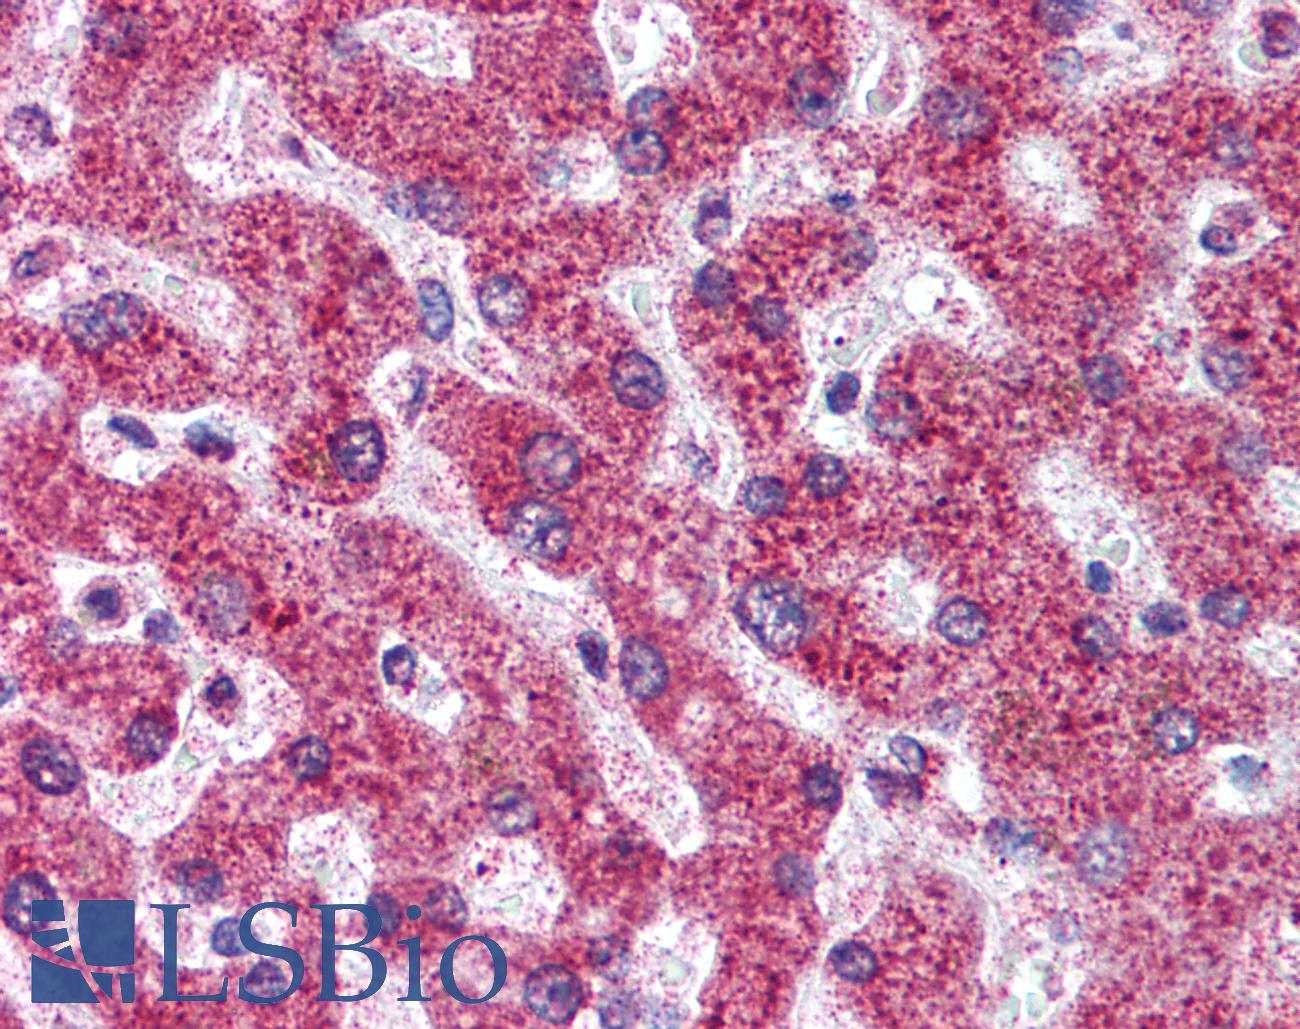 OPG / Osteoprotegerin Antibody - Anti-Osteoprotegerin antibody IHC of human liver. Immunohistochemistry of formalin-fixed, paraffin-embedded tissue after heat-induced antigen retrieval. Antibody concentration 5 ug/ml.